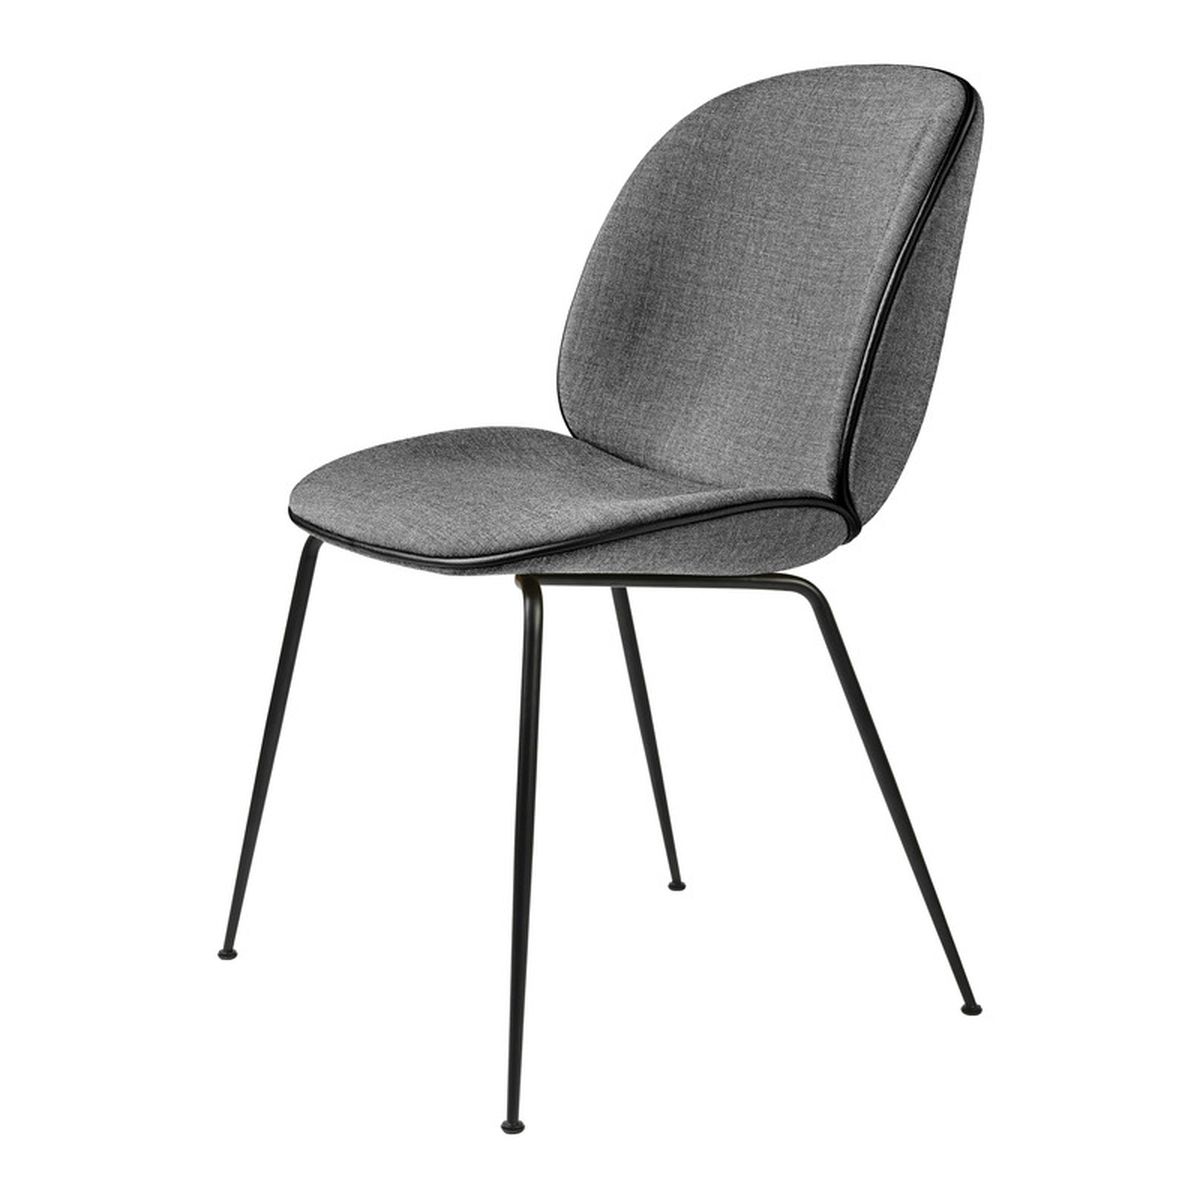 A gray chair with rounded seat and black metal legs.